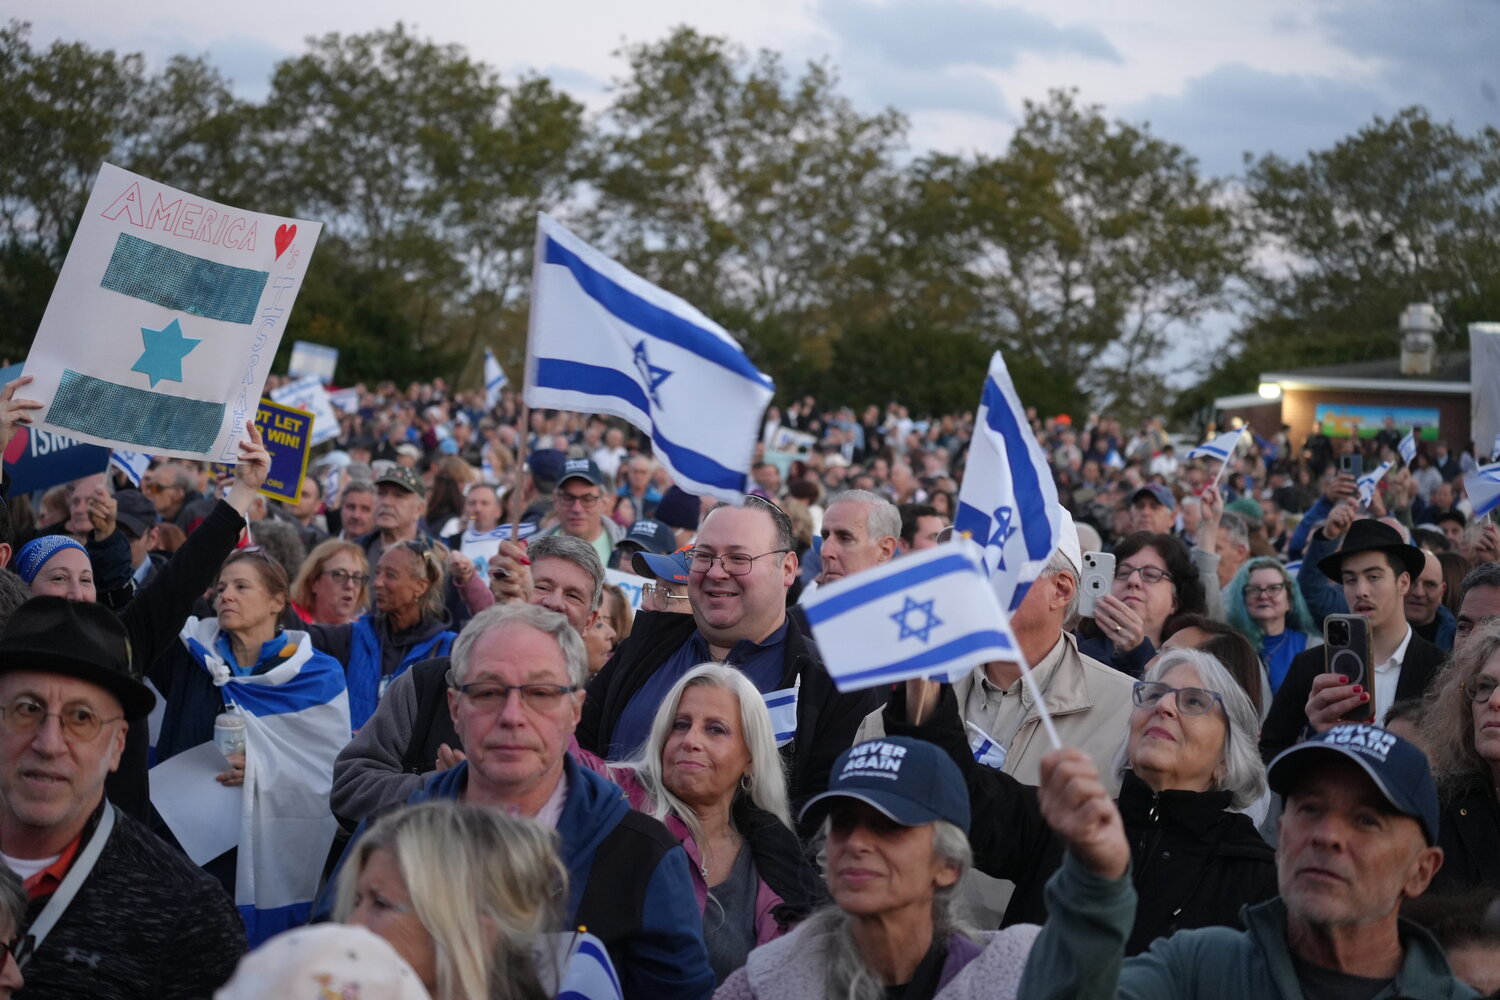 Despite an outpouring of support for Israel in Nassau County, antisemitic attacks in the county have been on the rise in the last decade.